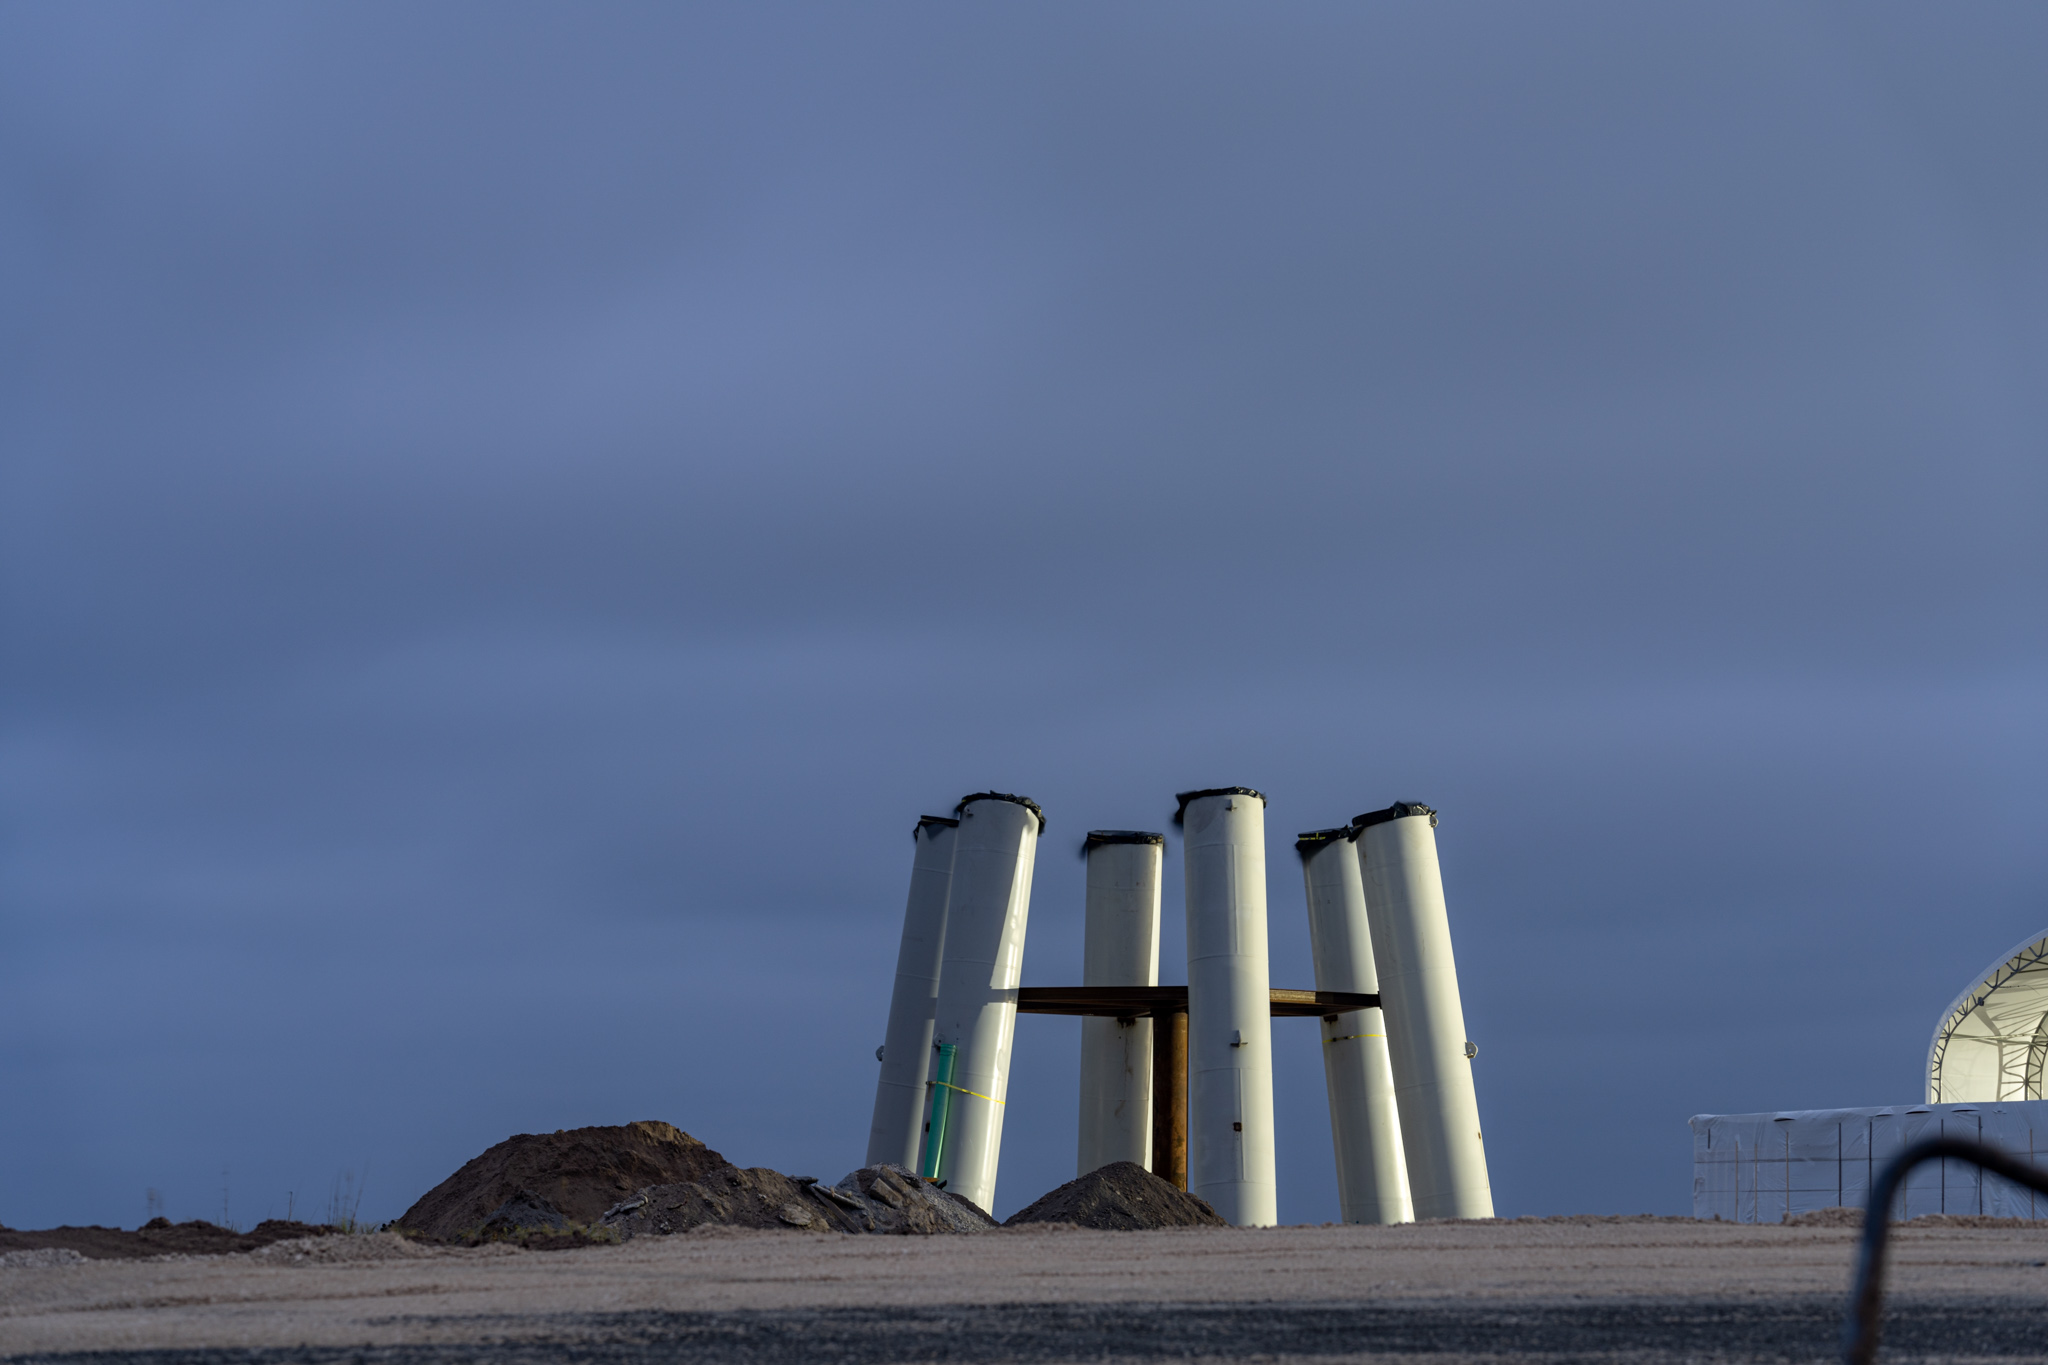 a group of white cylindrical structures